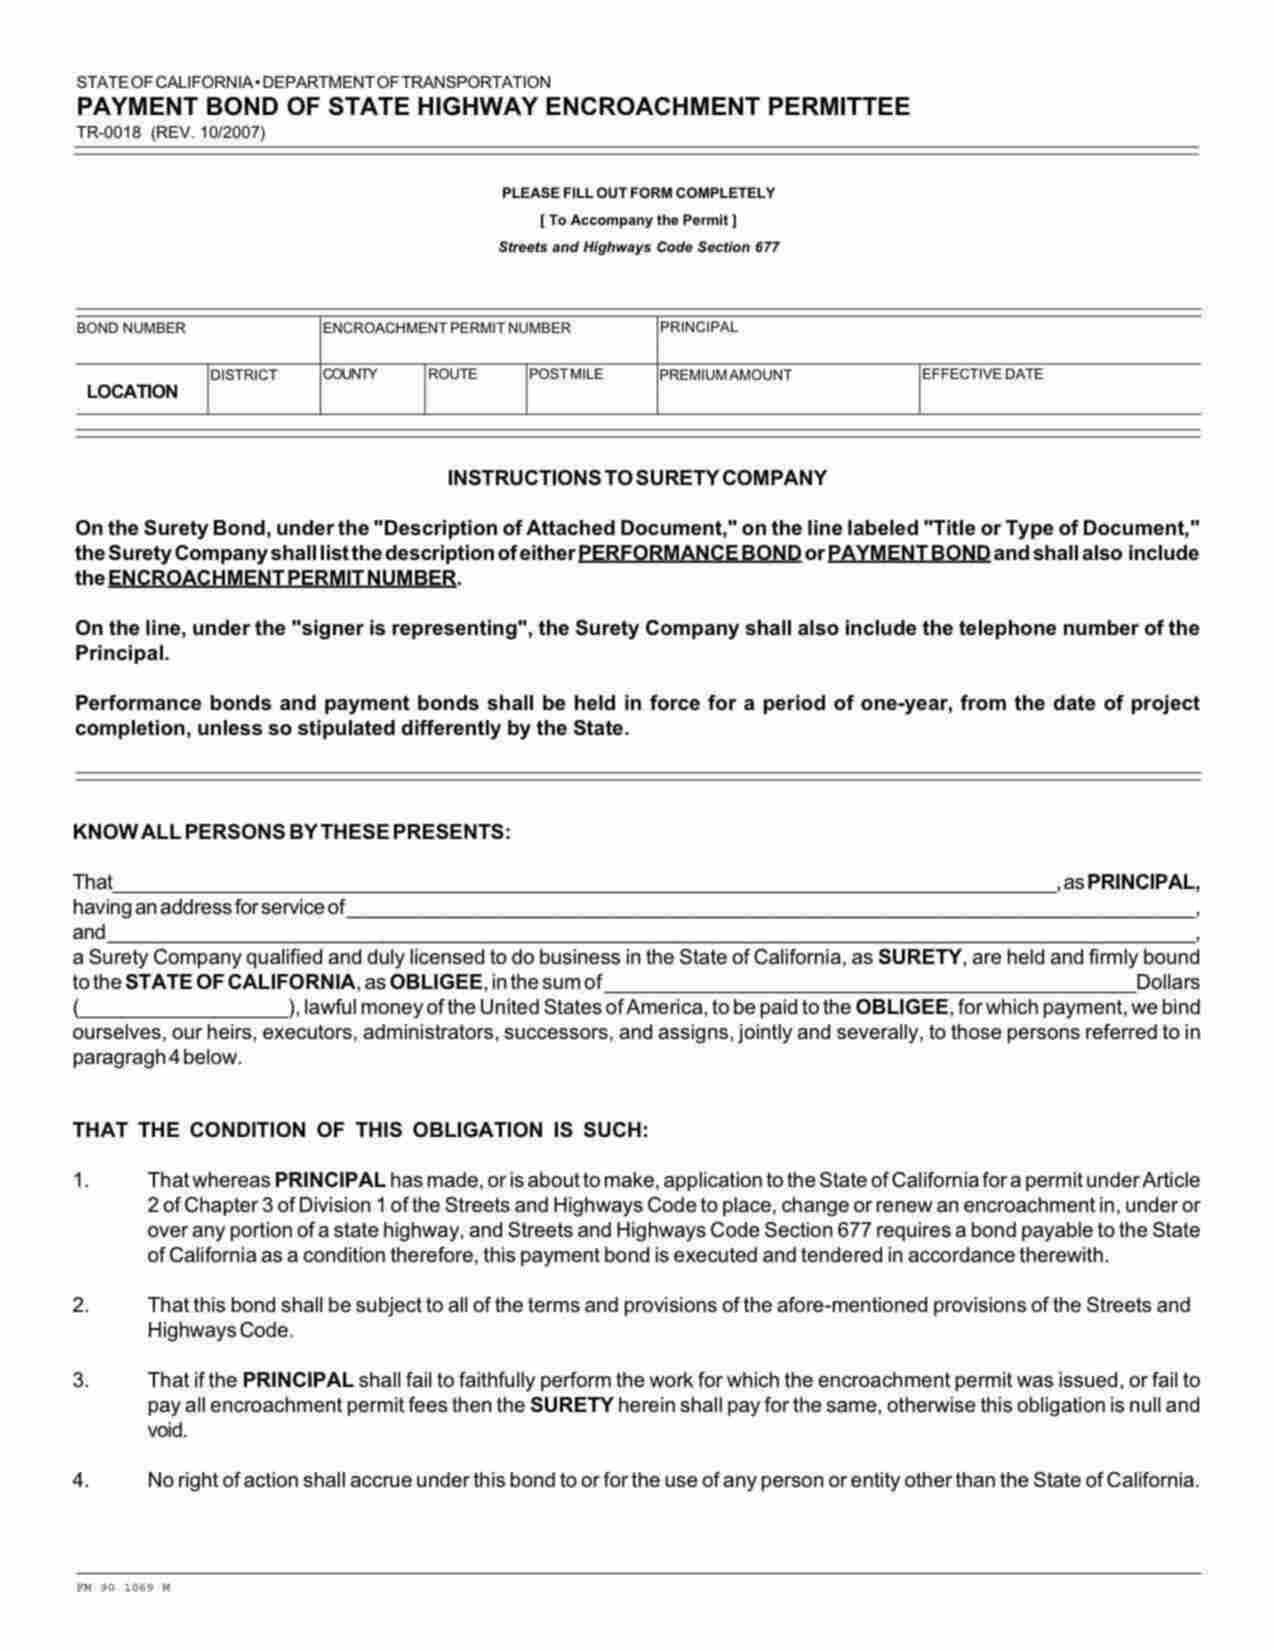 California Encroachment Permittee Payment Bond Form